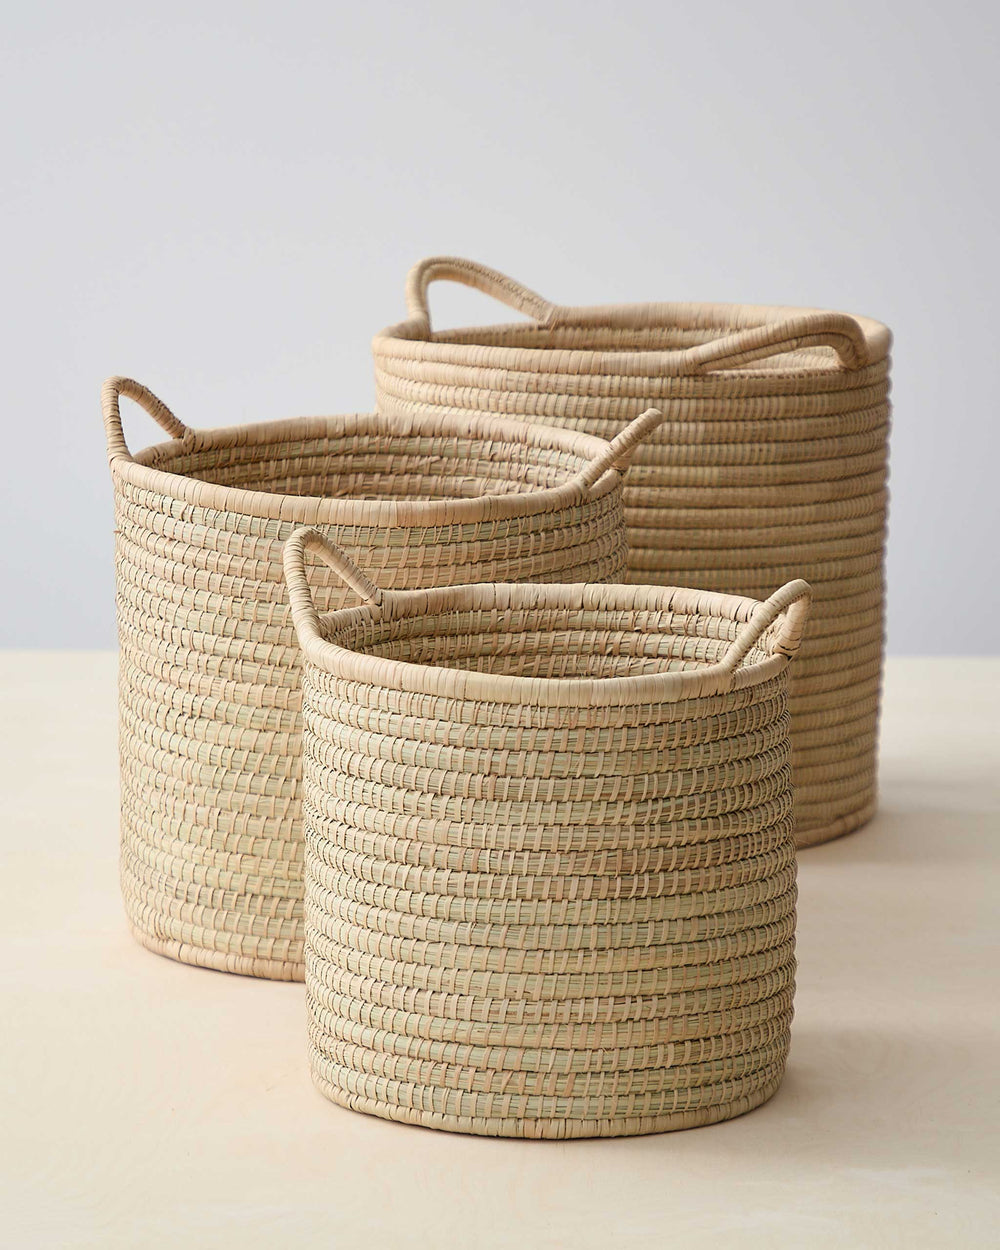 The Luka Storage Baskets by Fairkind. Handwoven with Ilala palm by artisans in Malawi.